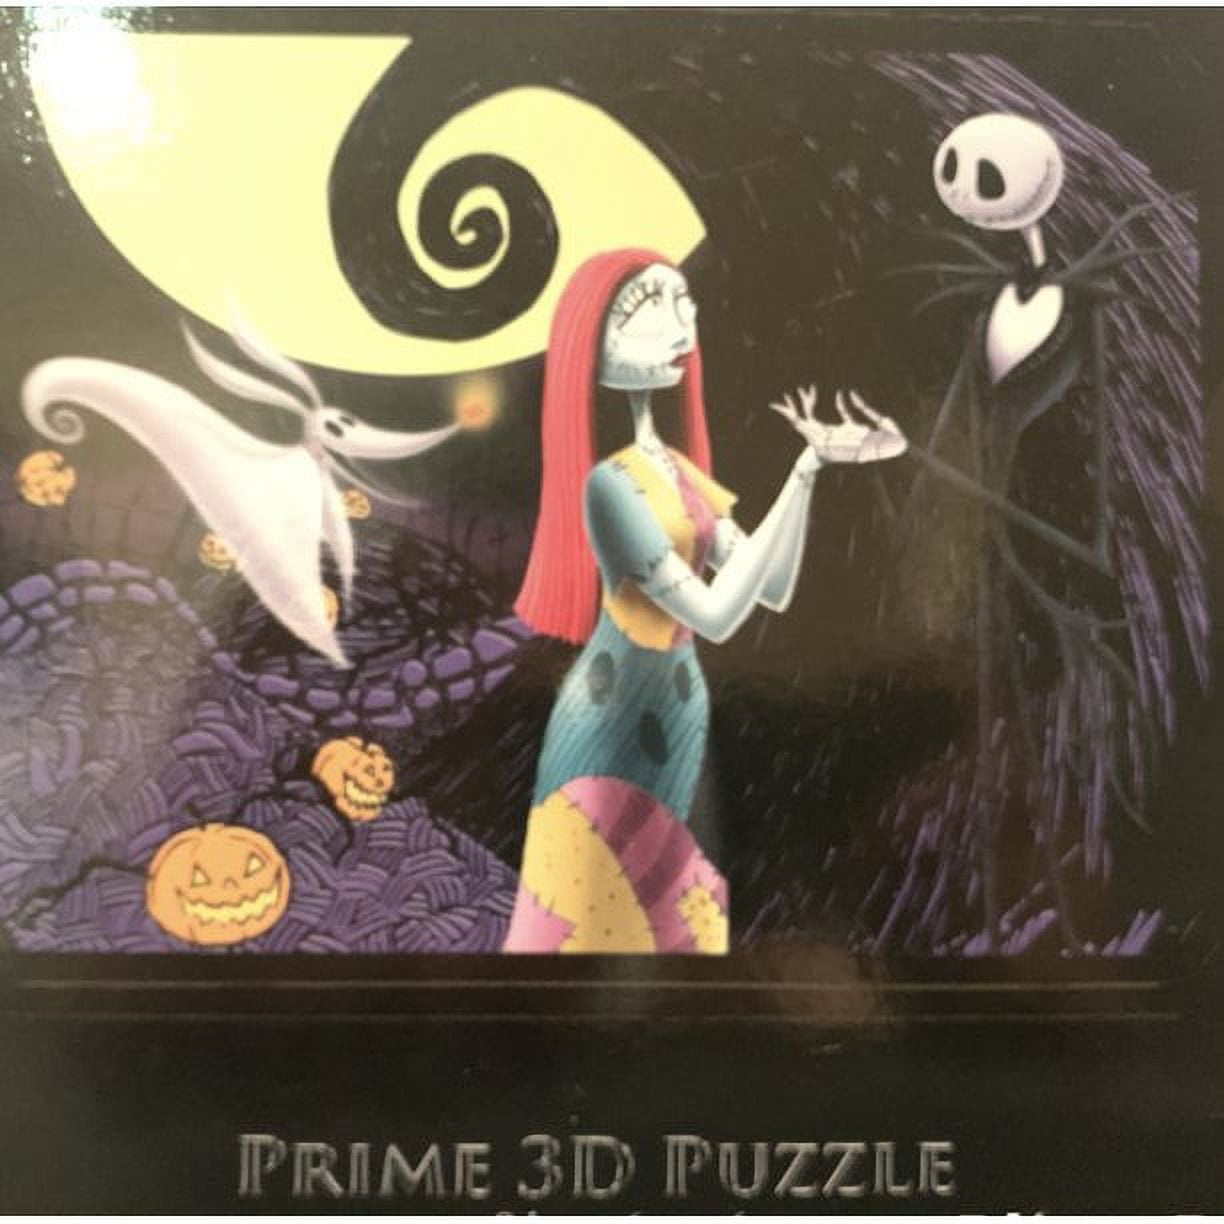 Disney's The Nightmare Before Christmas Prime 3D Puzzle with Jack &  Zero:500 Pcs - general for sale - by owner 